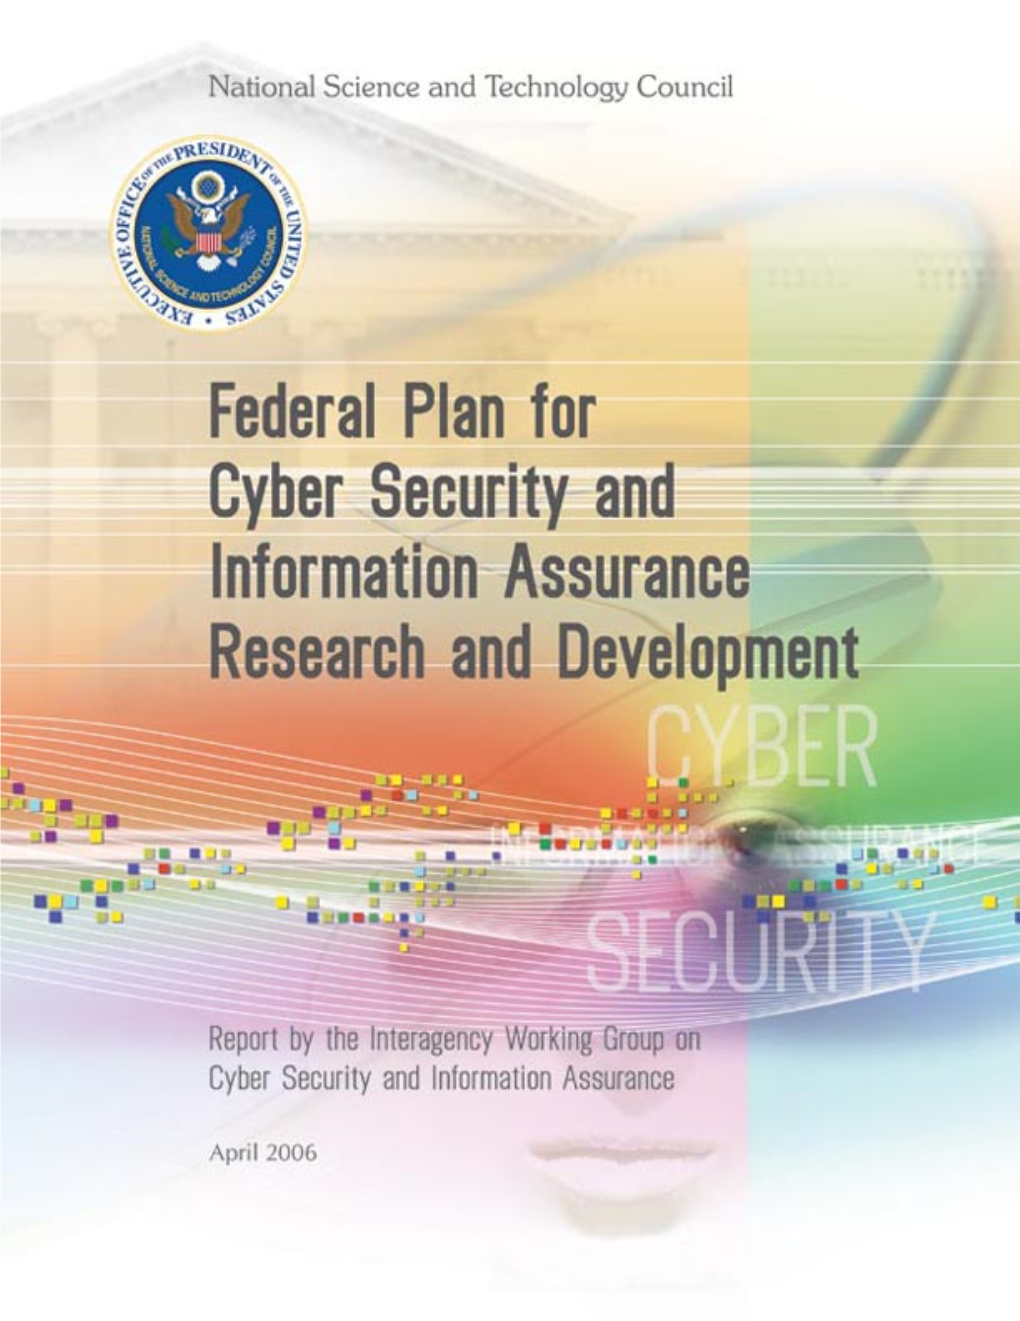 Federal Plan for Cyber Security and Information Assurance